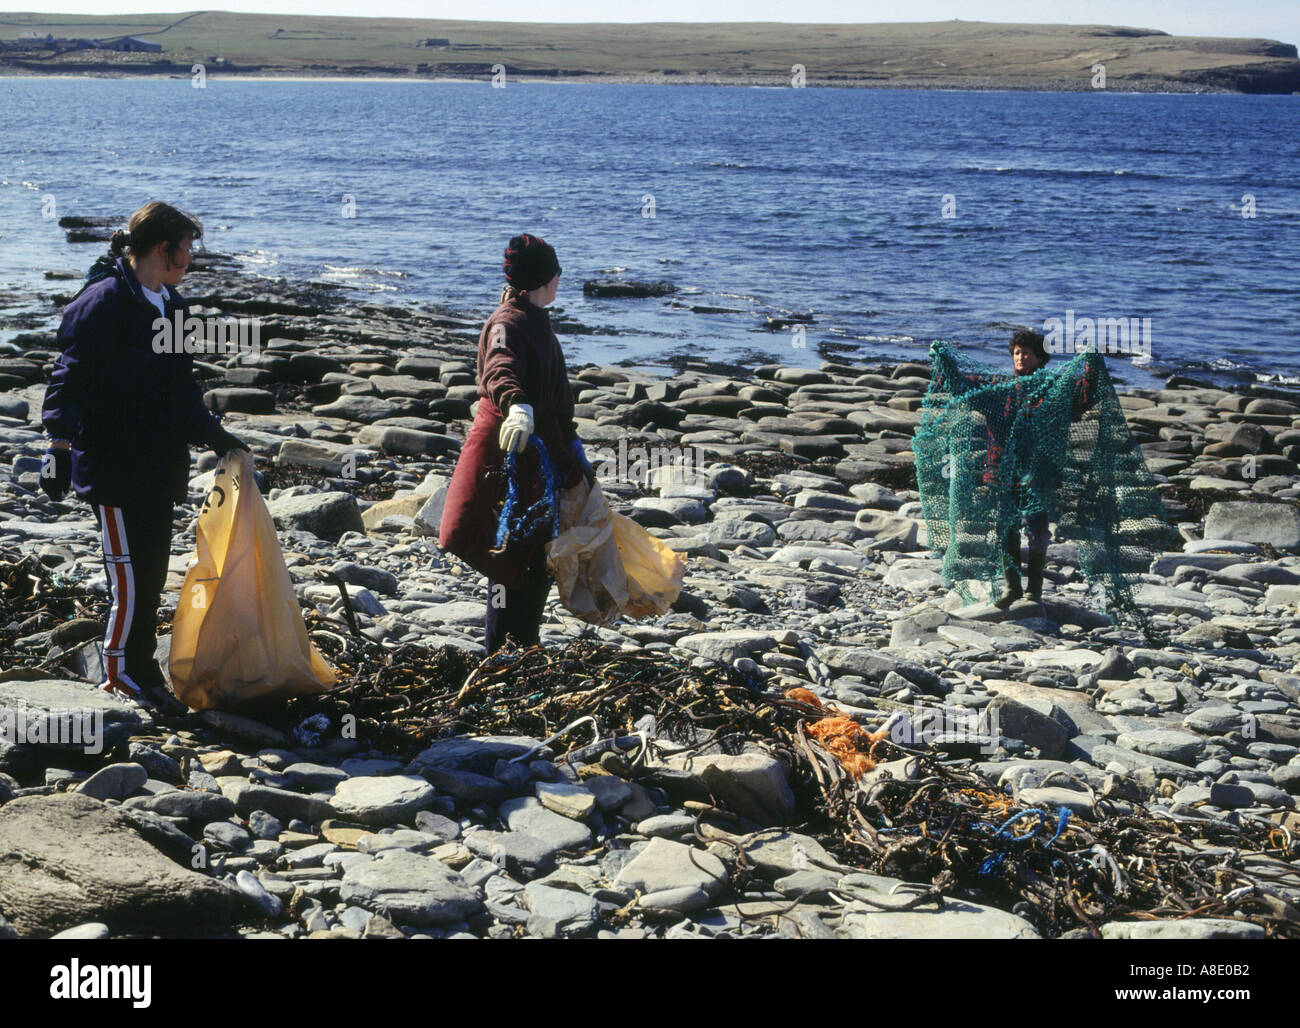 dh Bagging the Bruck ENVIRONMENT ORKNEY Women filling bags beach waste clearing rubbish teenagers cleaning uk clean up youth scotland people trash Stock Photo